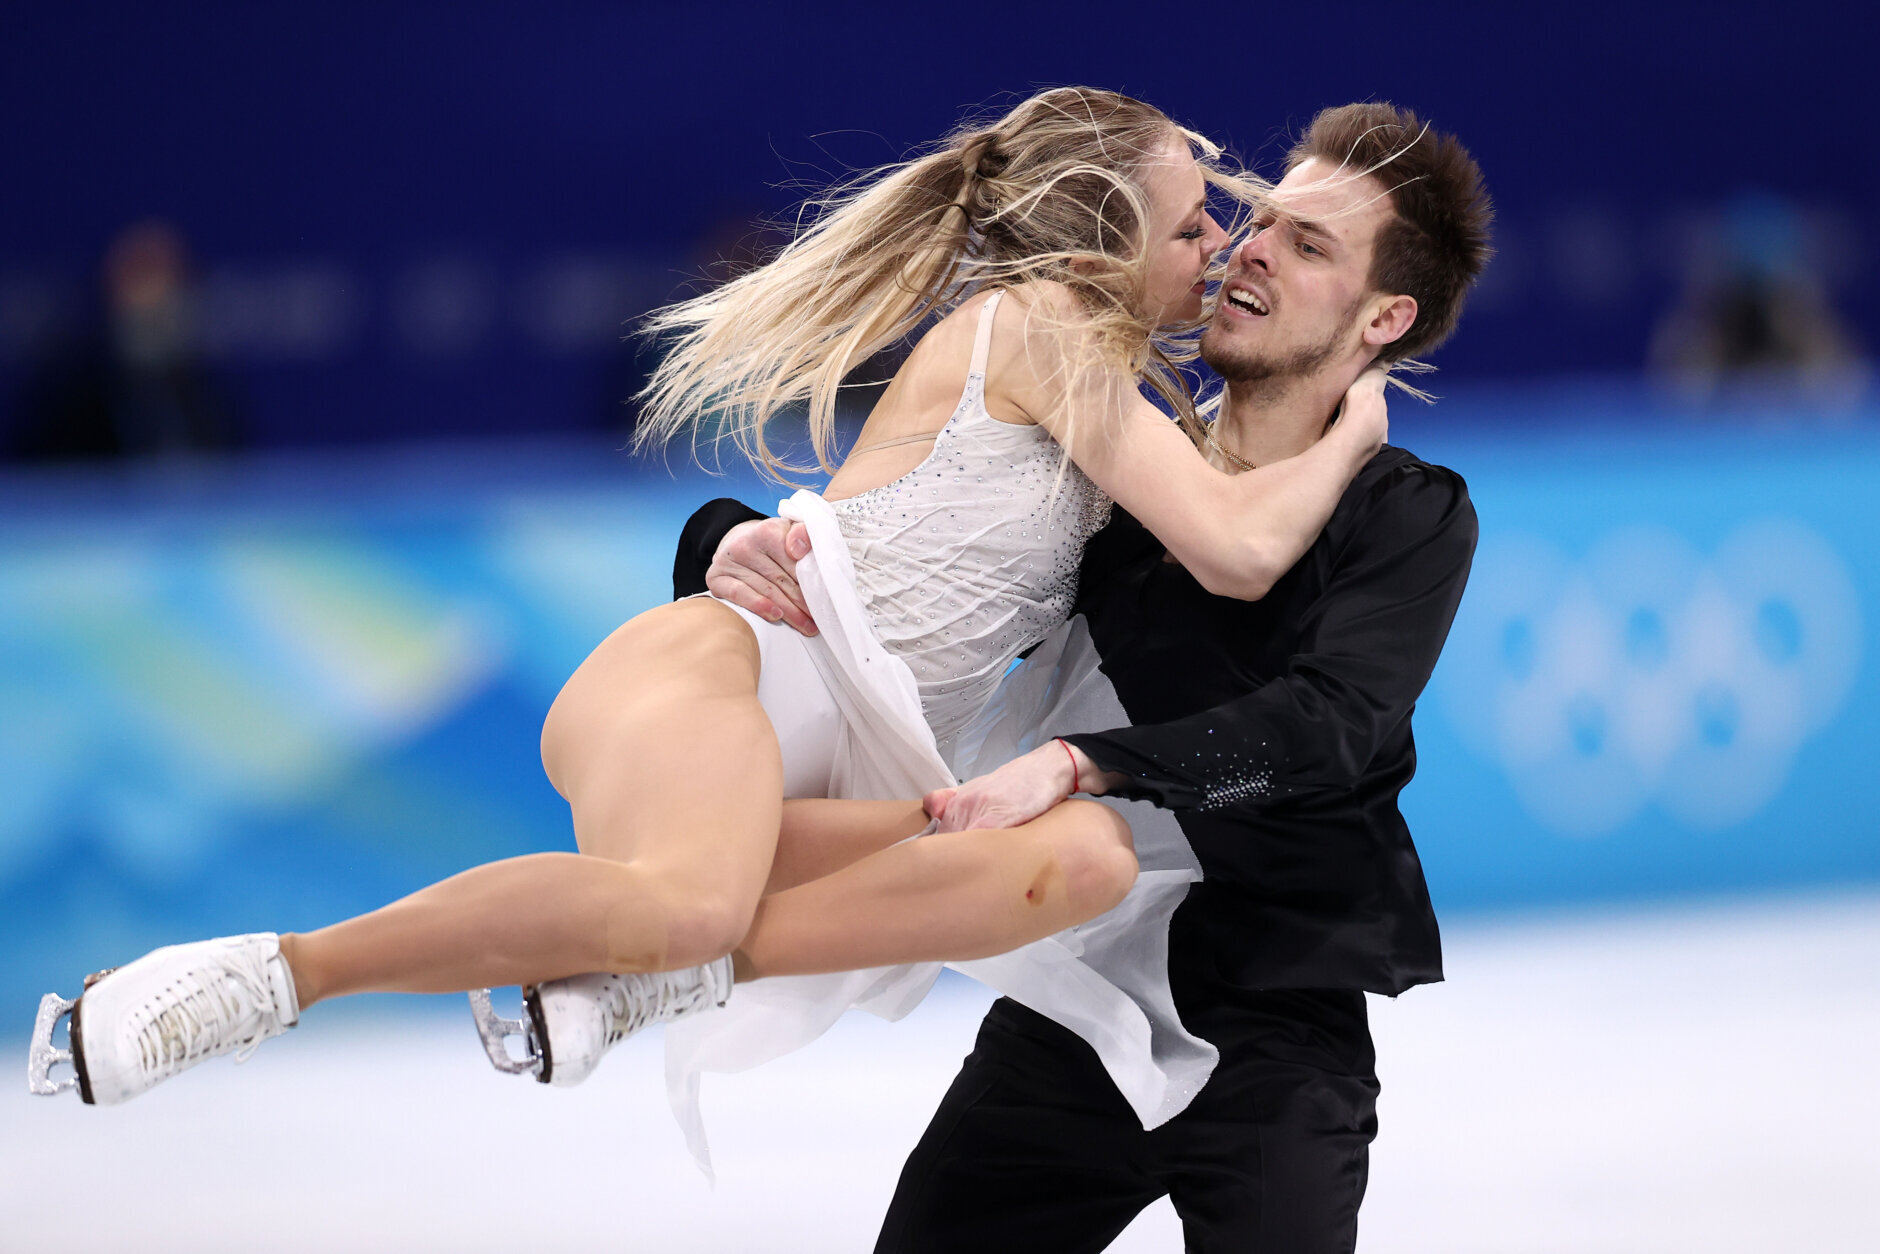 BEIJING, CHINA - FEBRUARY 14: Victoria Sinitsina and Nikita Katsalapov of Team ROC skate during the Ice Dance Free Dance on day ten of the Beijing 2022 Winter Olympic Games at Capital Indoor Stadium on February 14, 2022 in Beijing, China. (Photo by Dean Mouhtaropoulos/Getty Images)